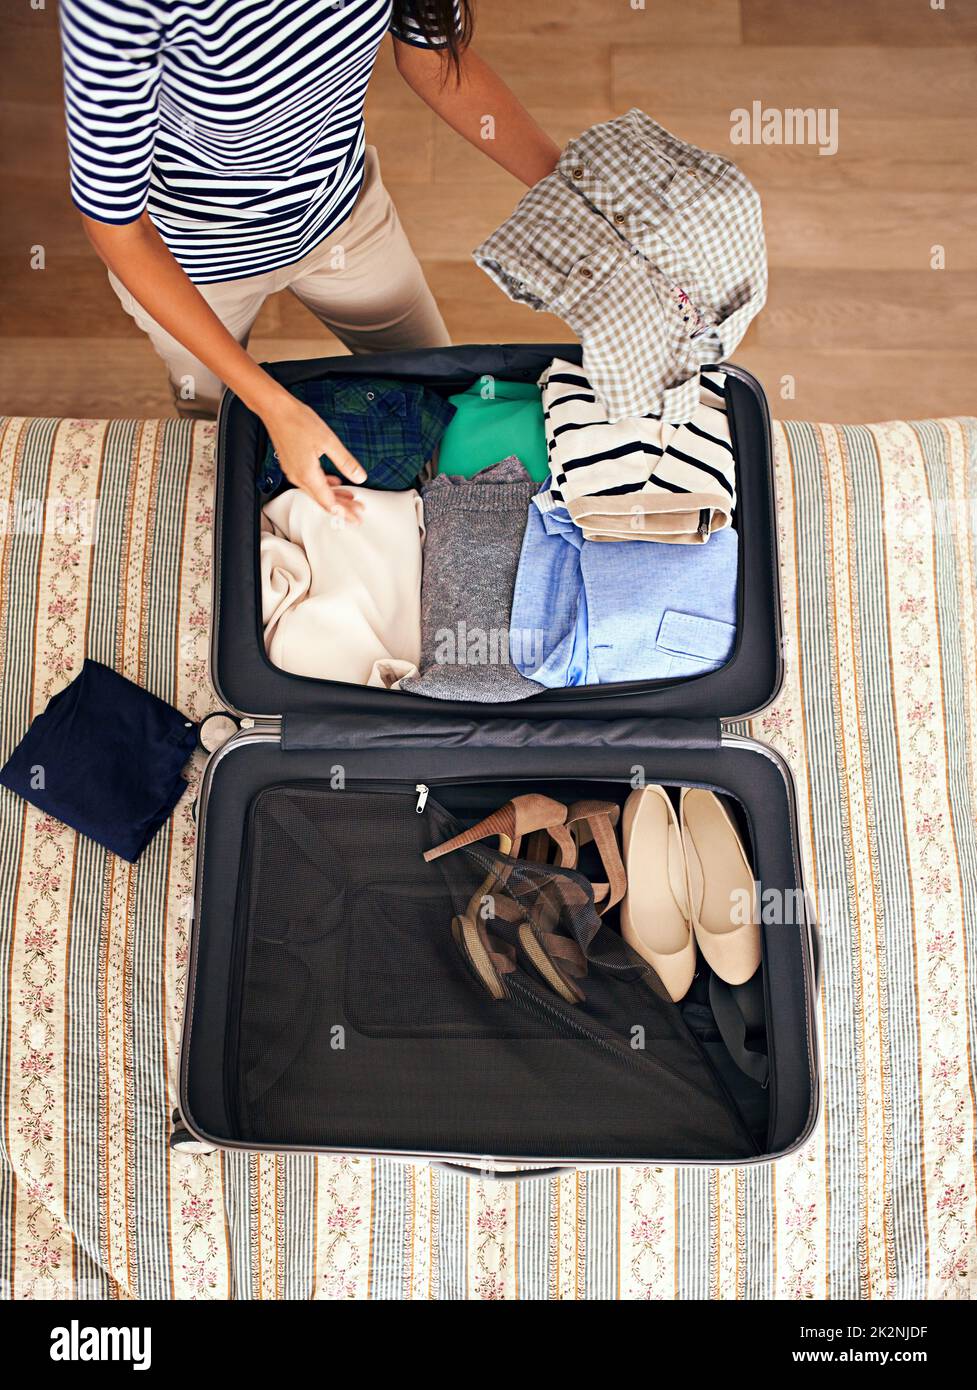 Cropped Shot Of Woman Packing Suitcase For Free Stock Photo and